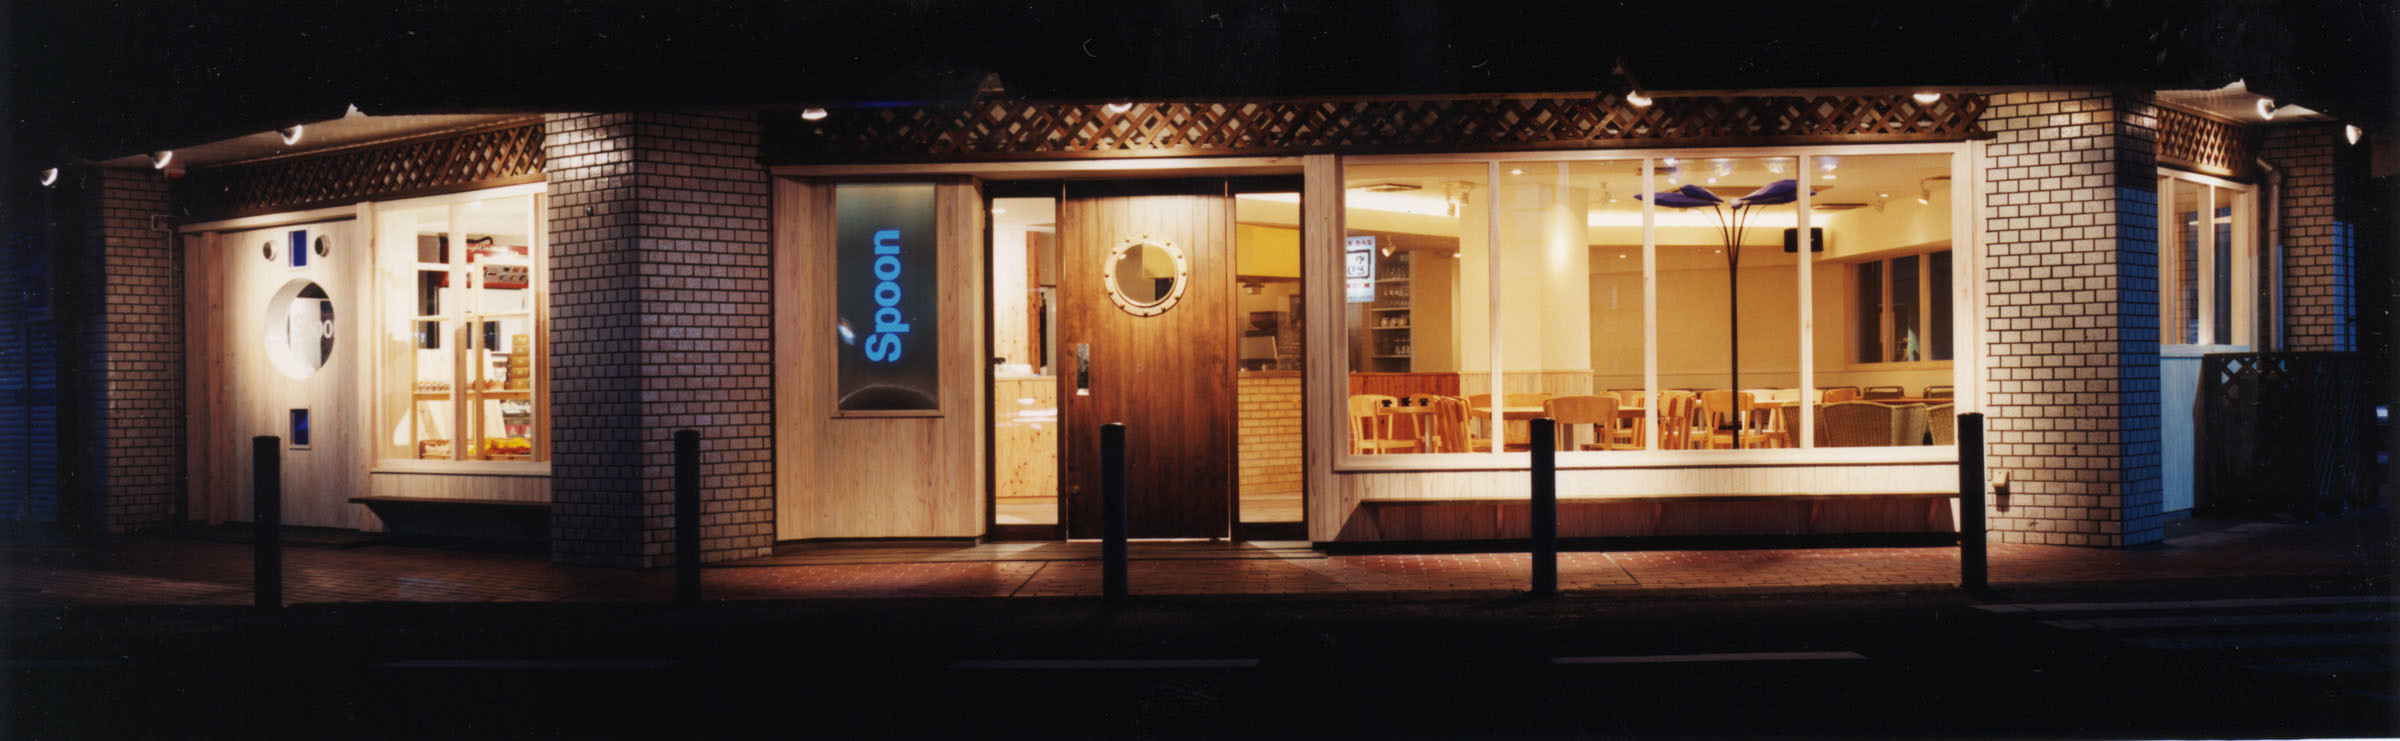 Spoon cafe　外観　夕景 | Spoon cafe　＜店舗リノベーション＞